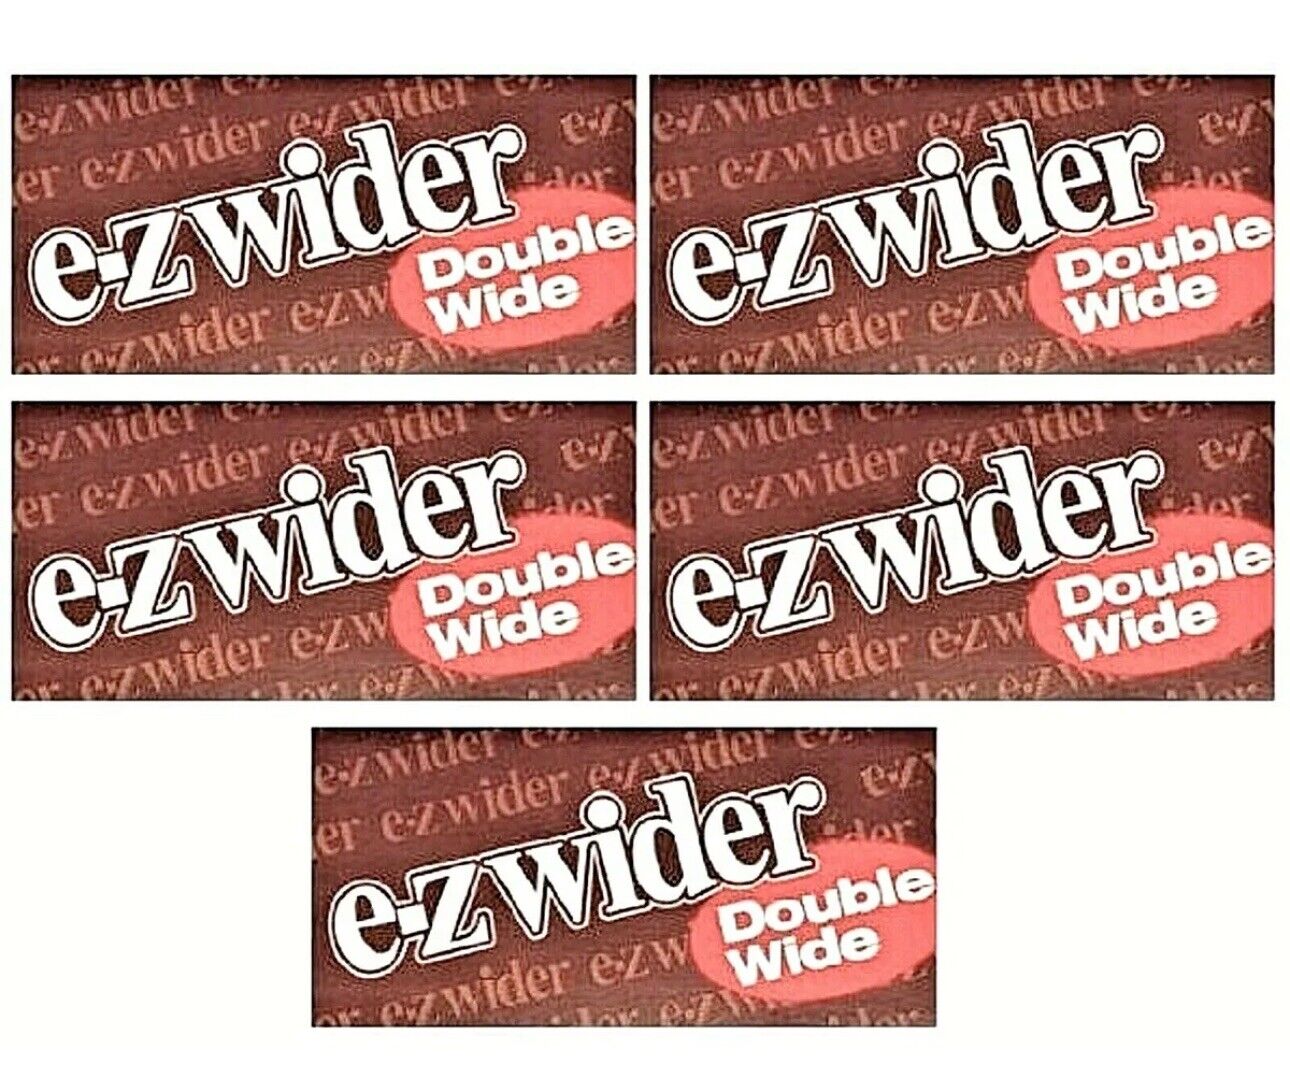 5x EZ Wider Rolling Papers Double Wide *GENUINE* 5 Packs